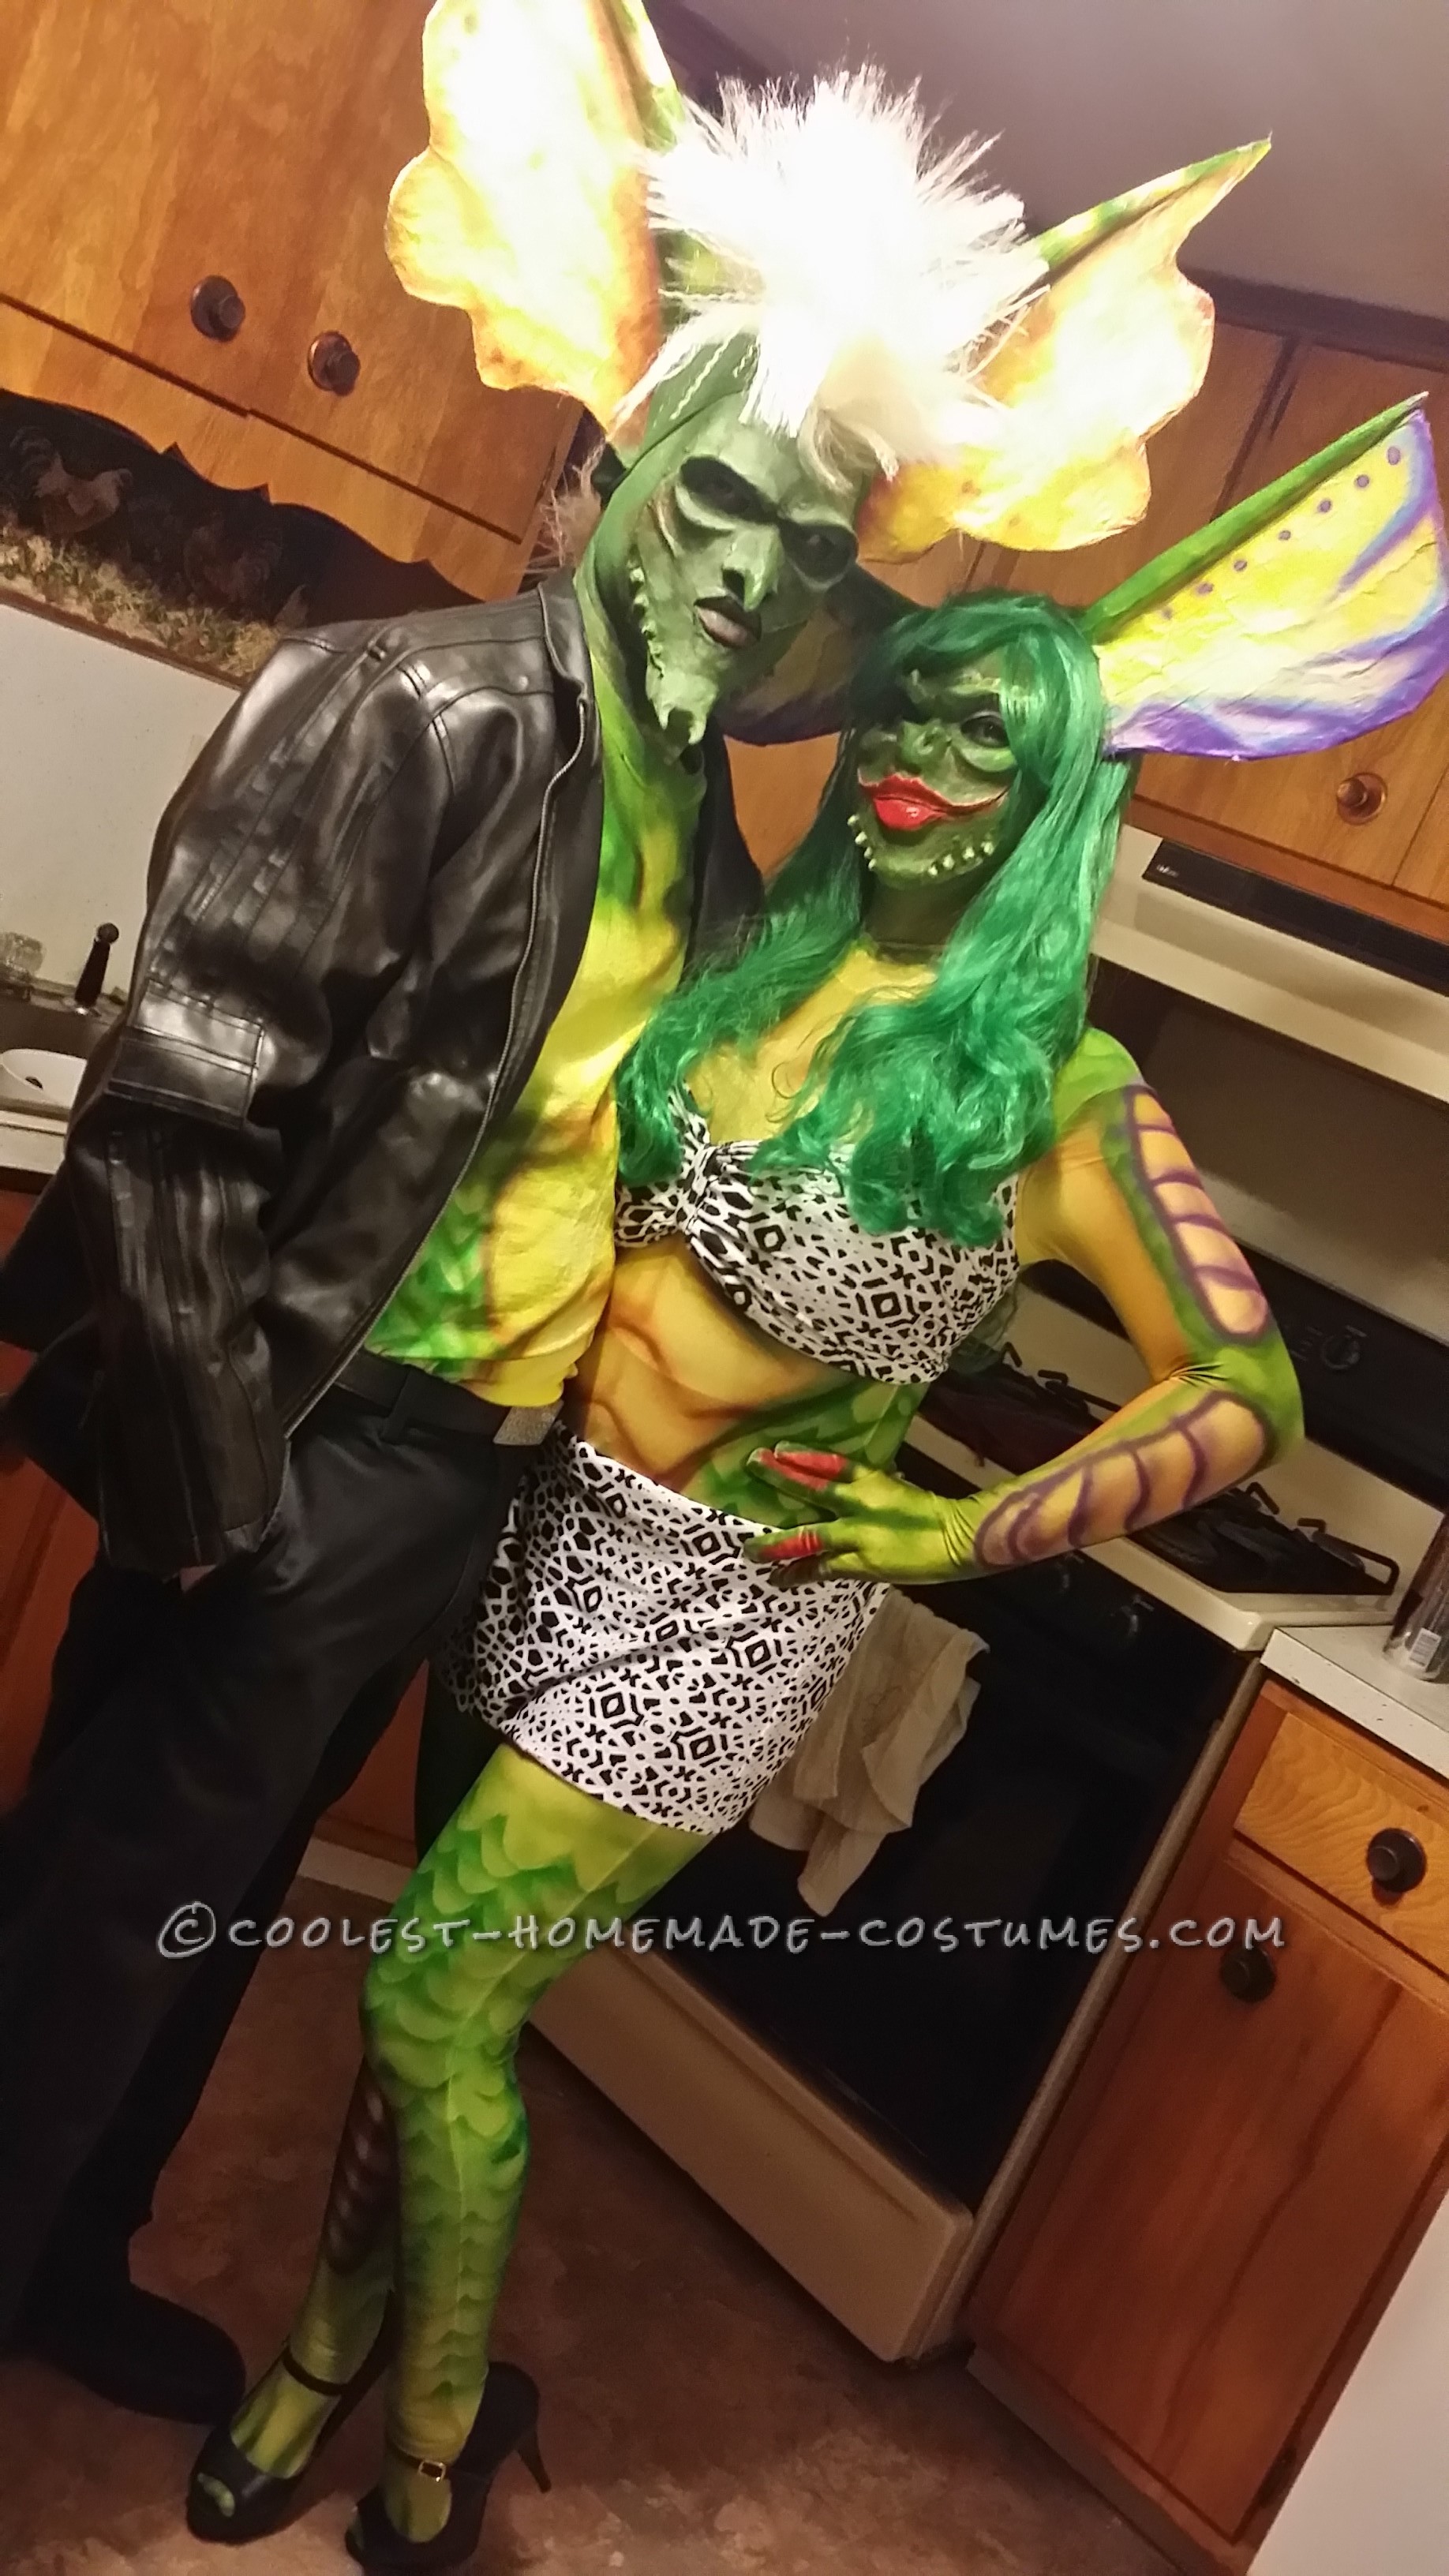 Coolest Homemade Gremlin Couple Costume